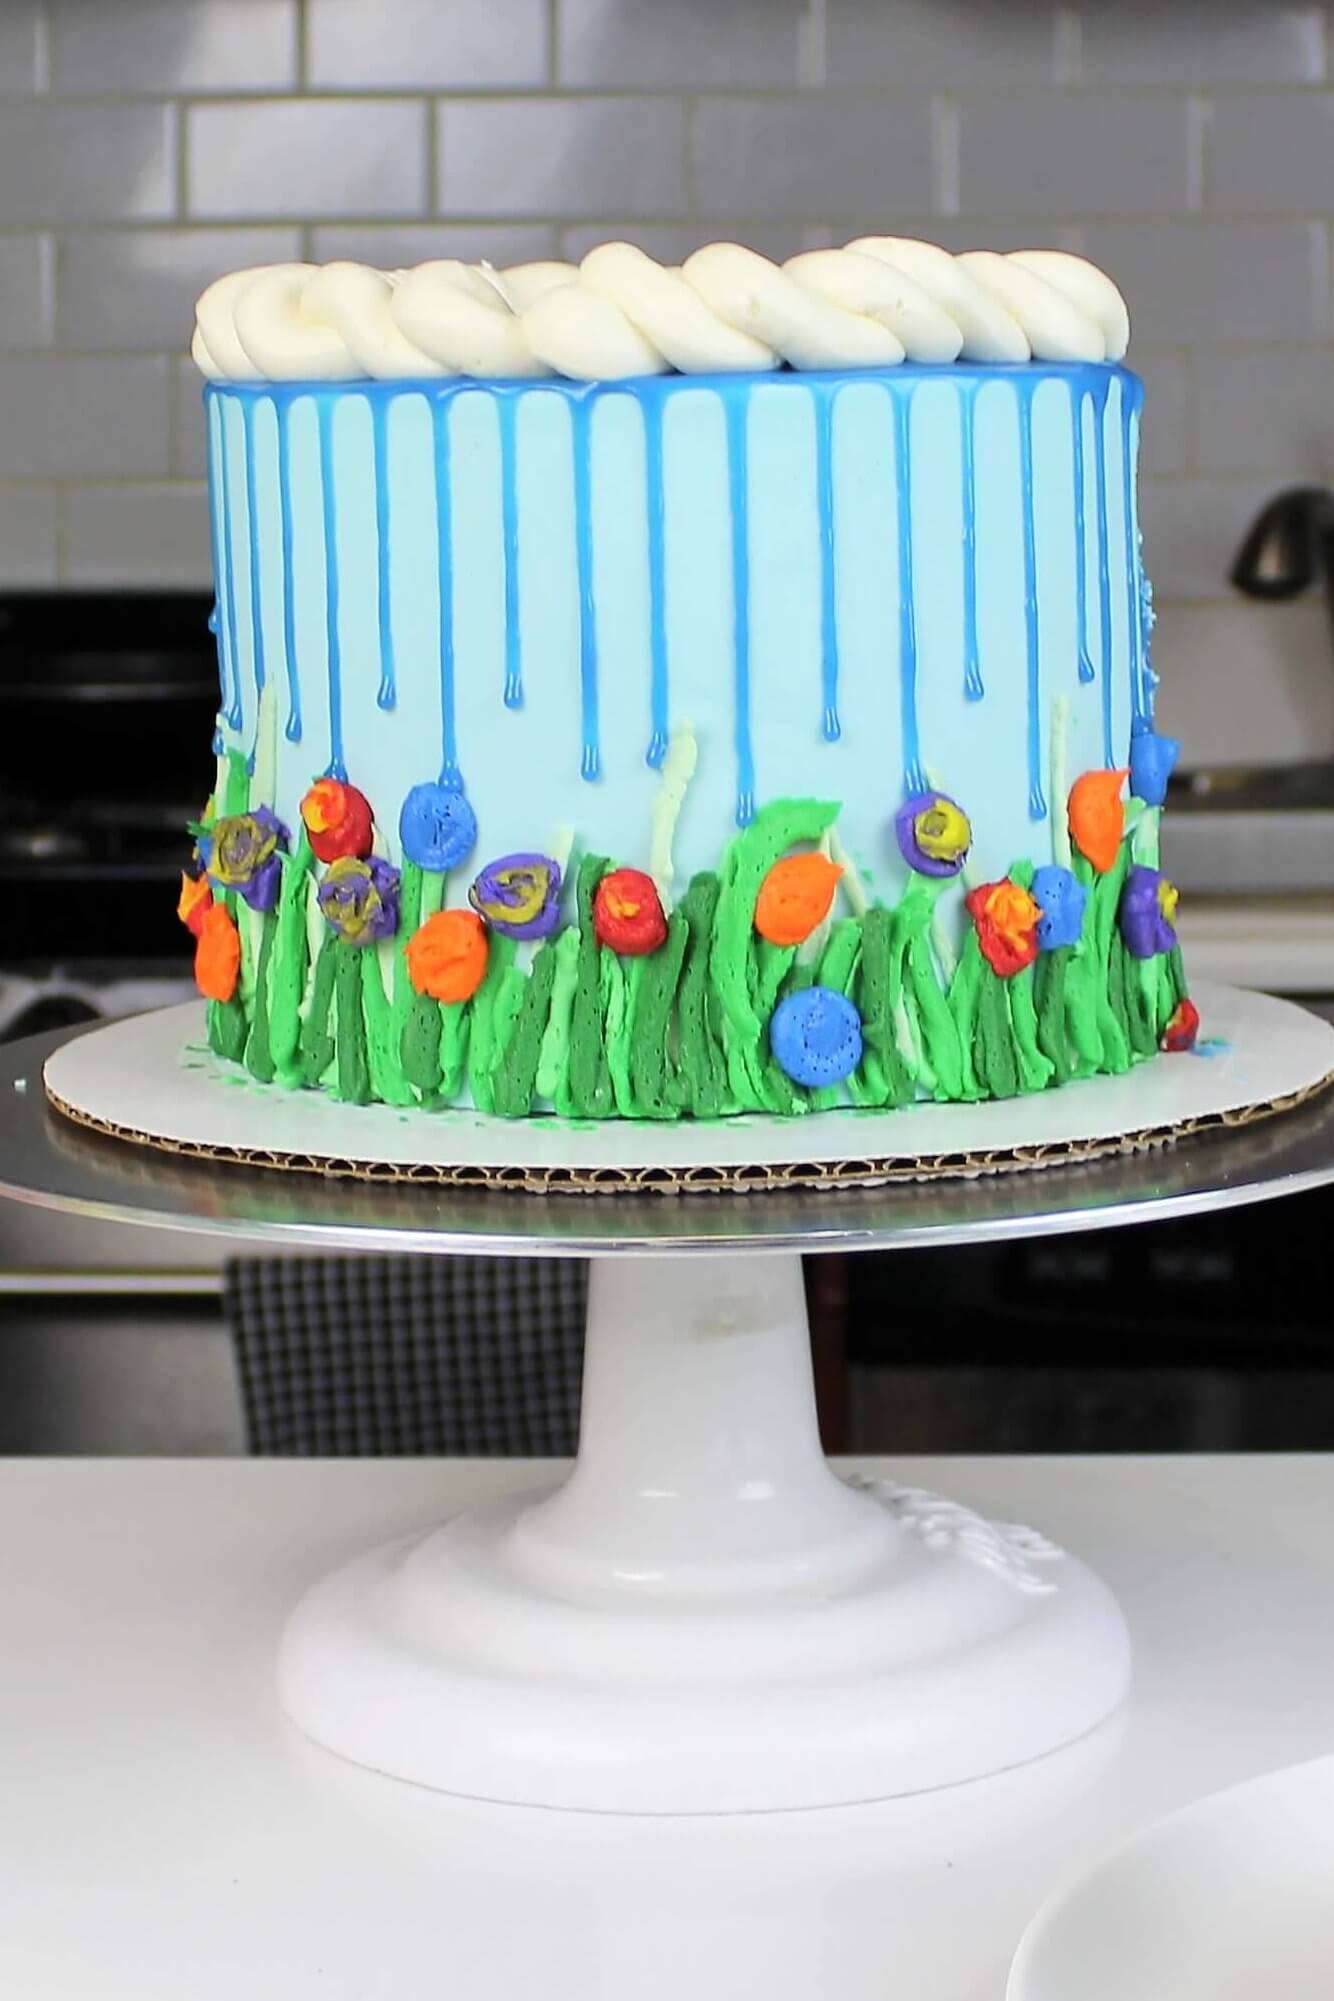 photo of a spring-themed cake, my april showers cake